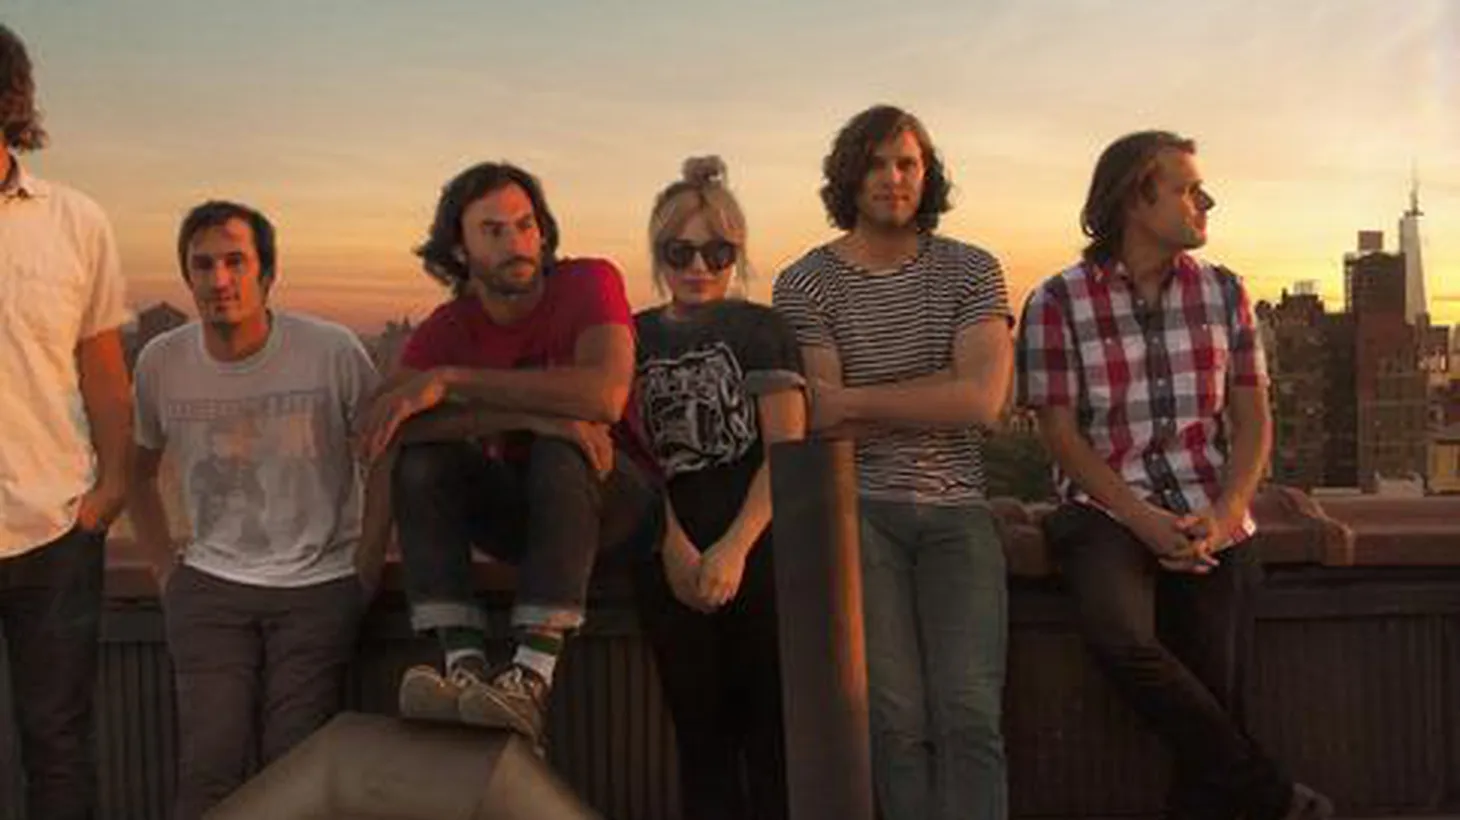 Seattle's The Head & The Heart have clocked countless miles touring the world since their debut recording in 2010.